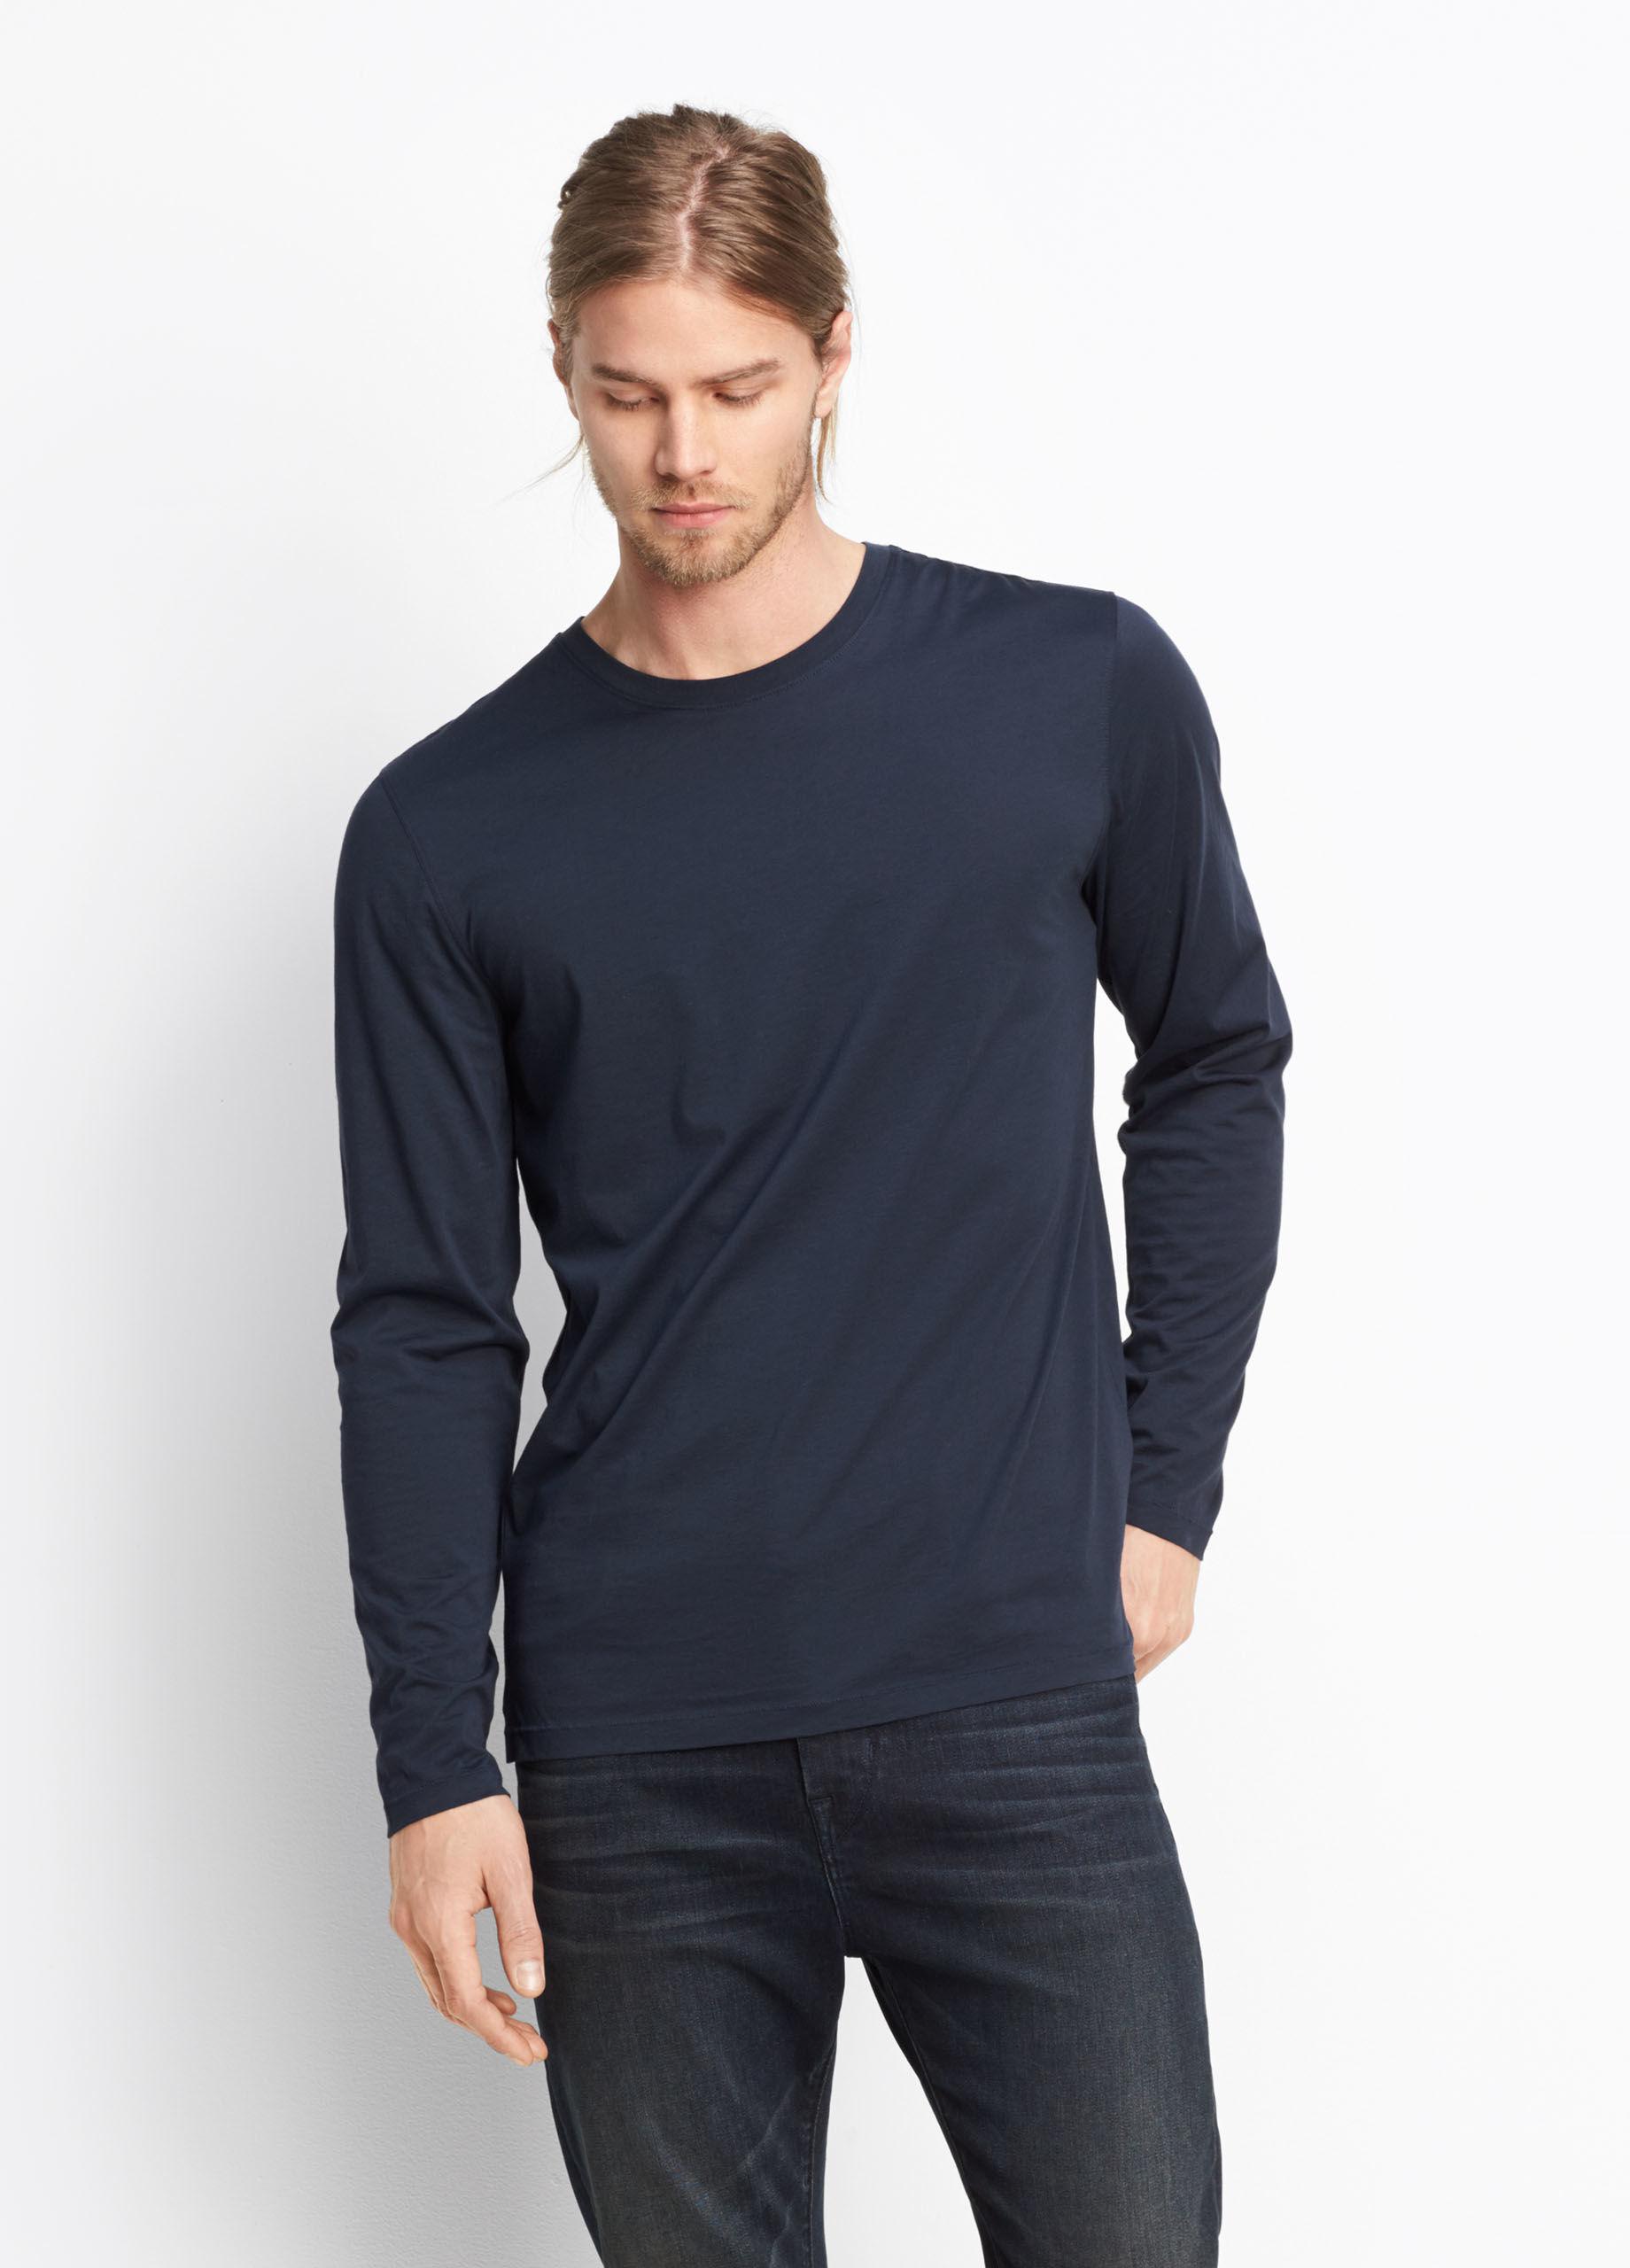 Vince Cotton Long Sleeve Raw Edge Crew in Blue for Men - Lyst